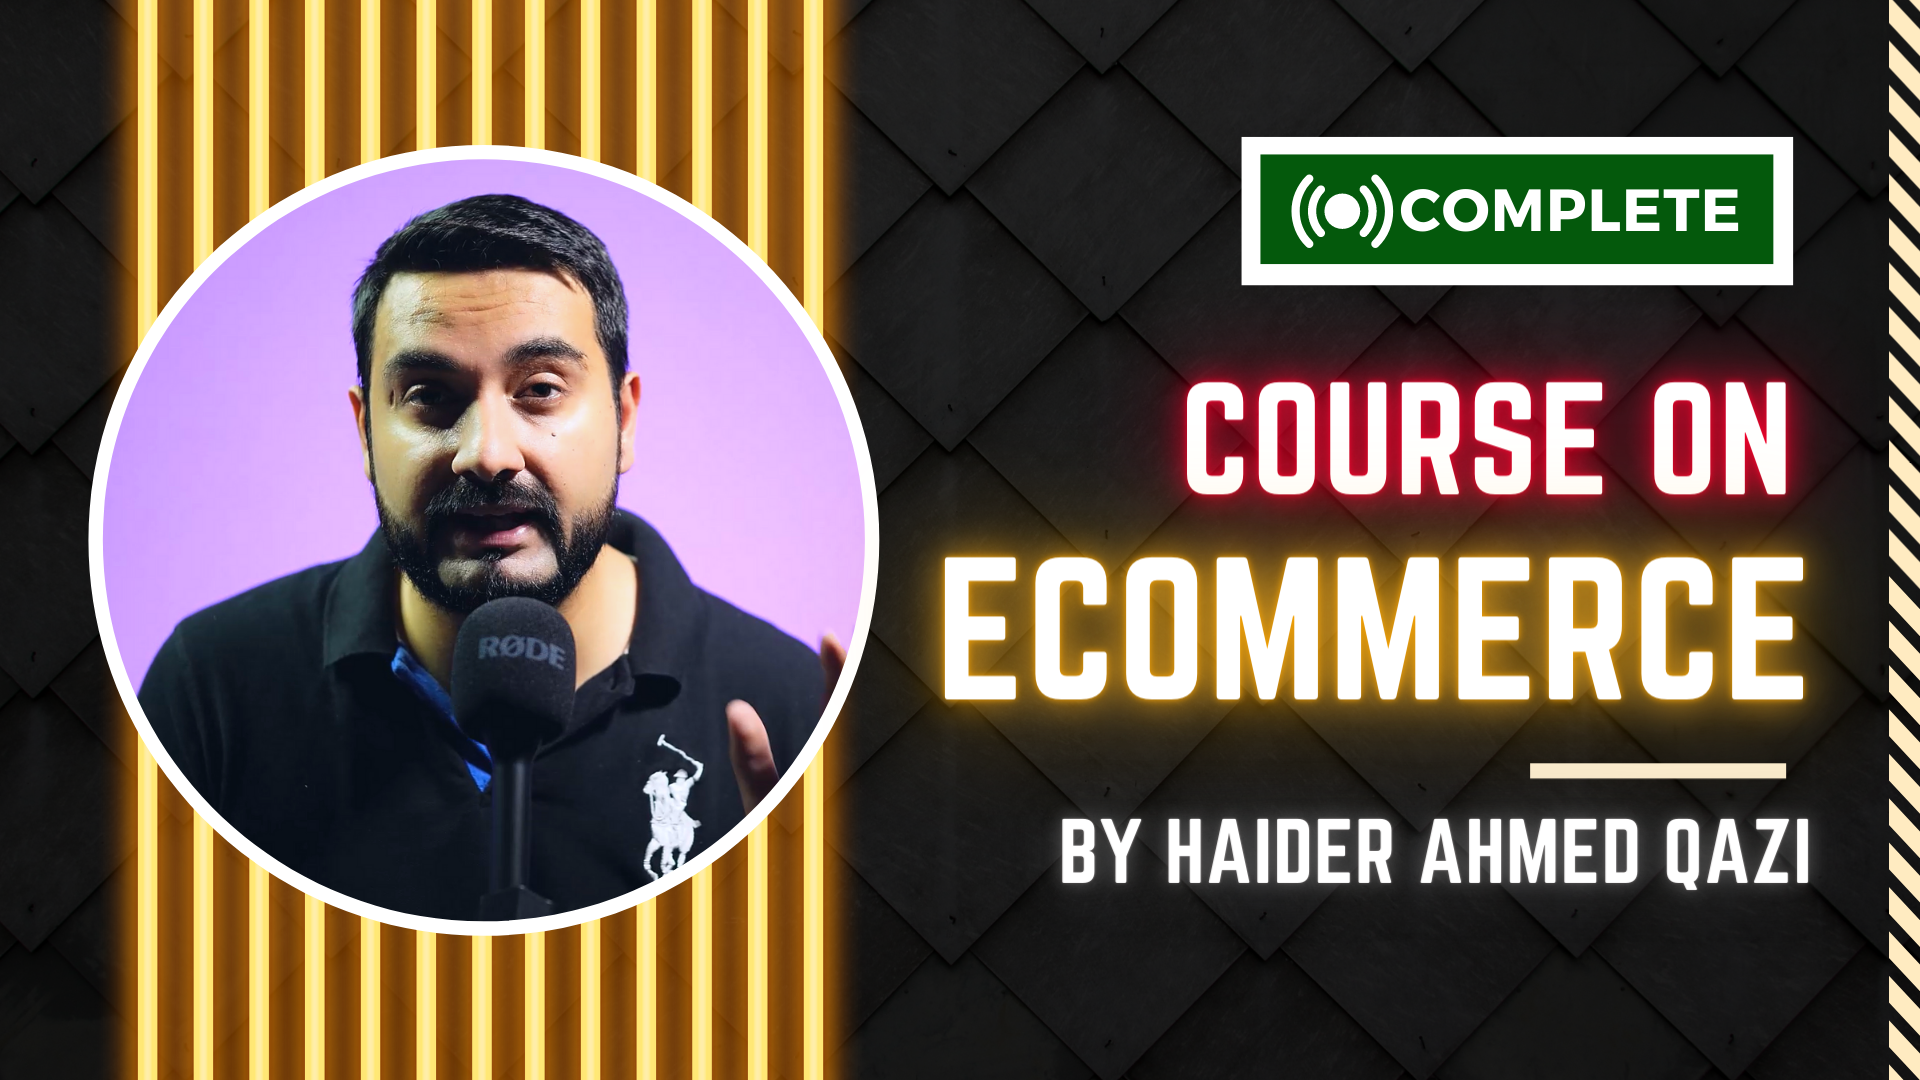 How to start Ecommerce Business in Pakistan - Ecommerce Course